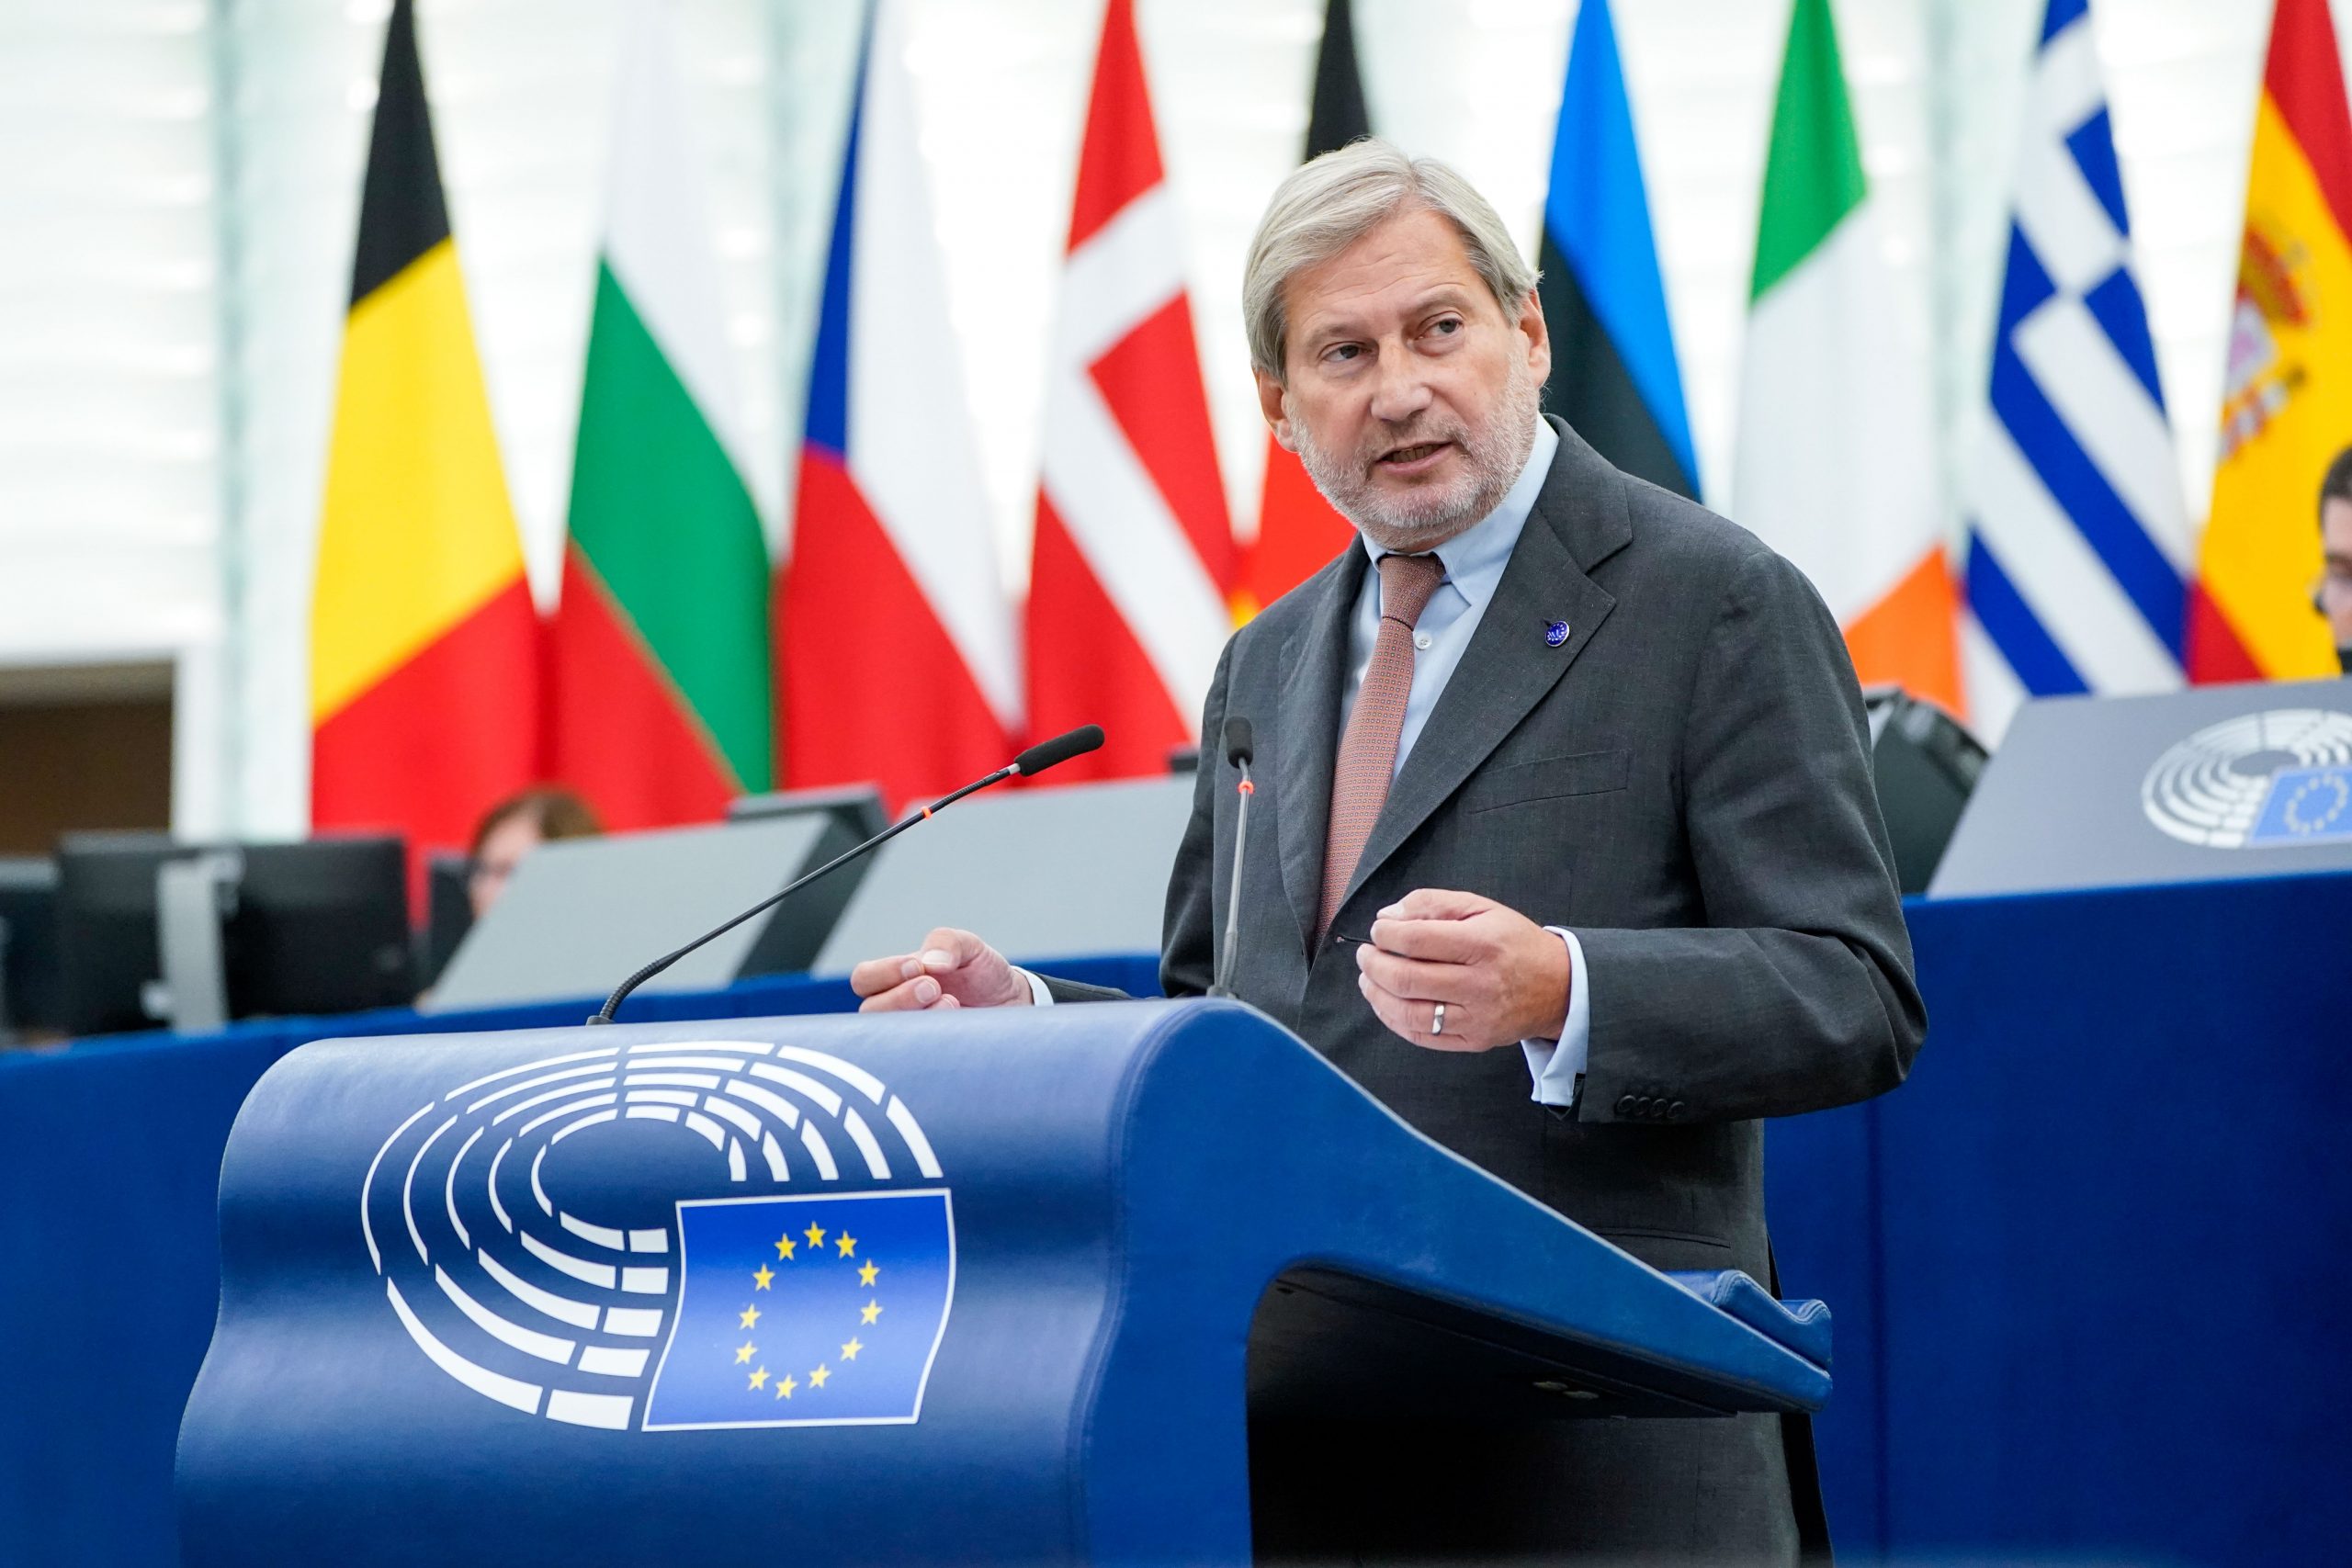 The European Parliament Continues to Aggravate Hungary